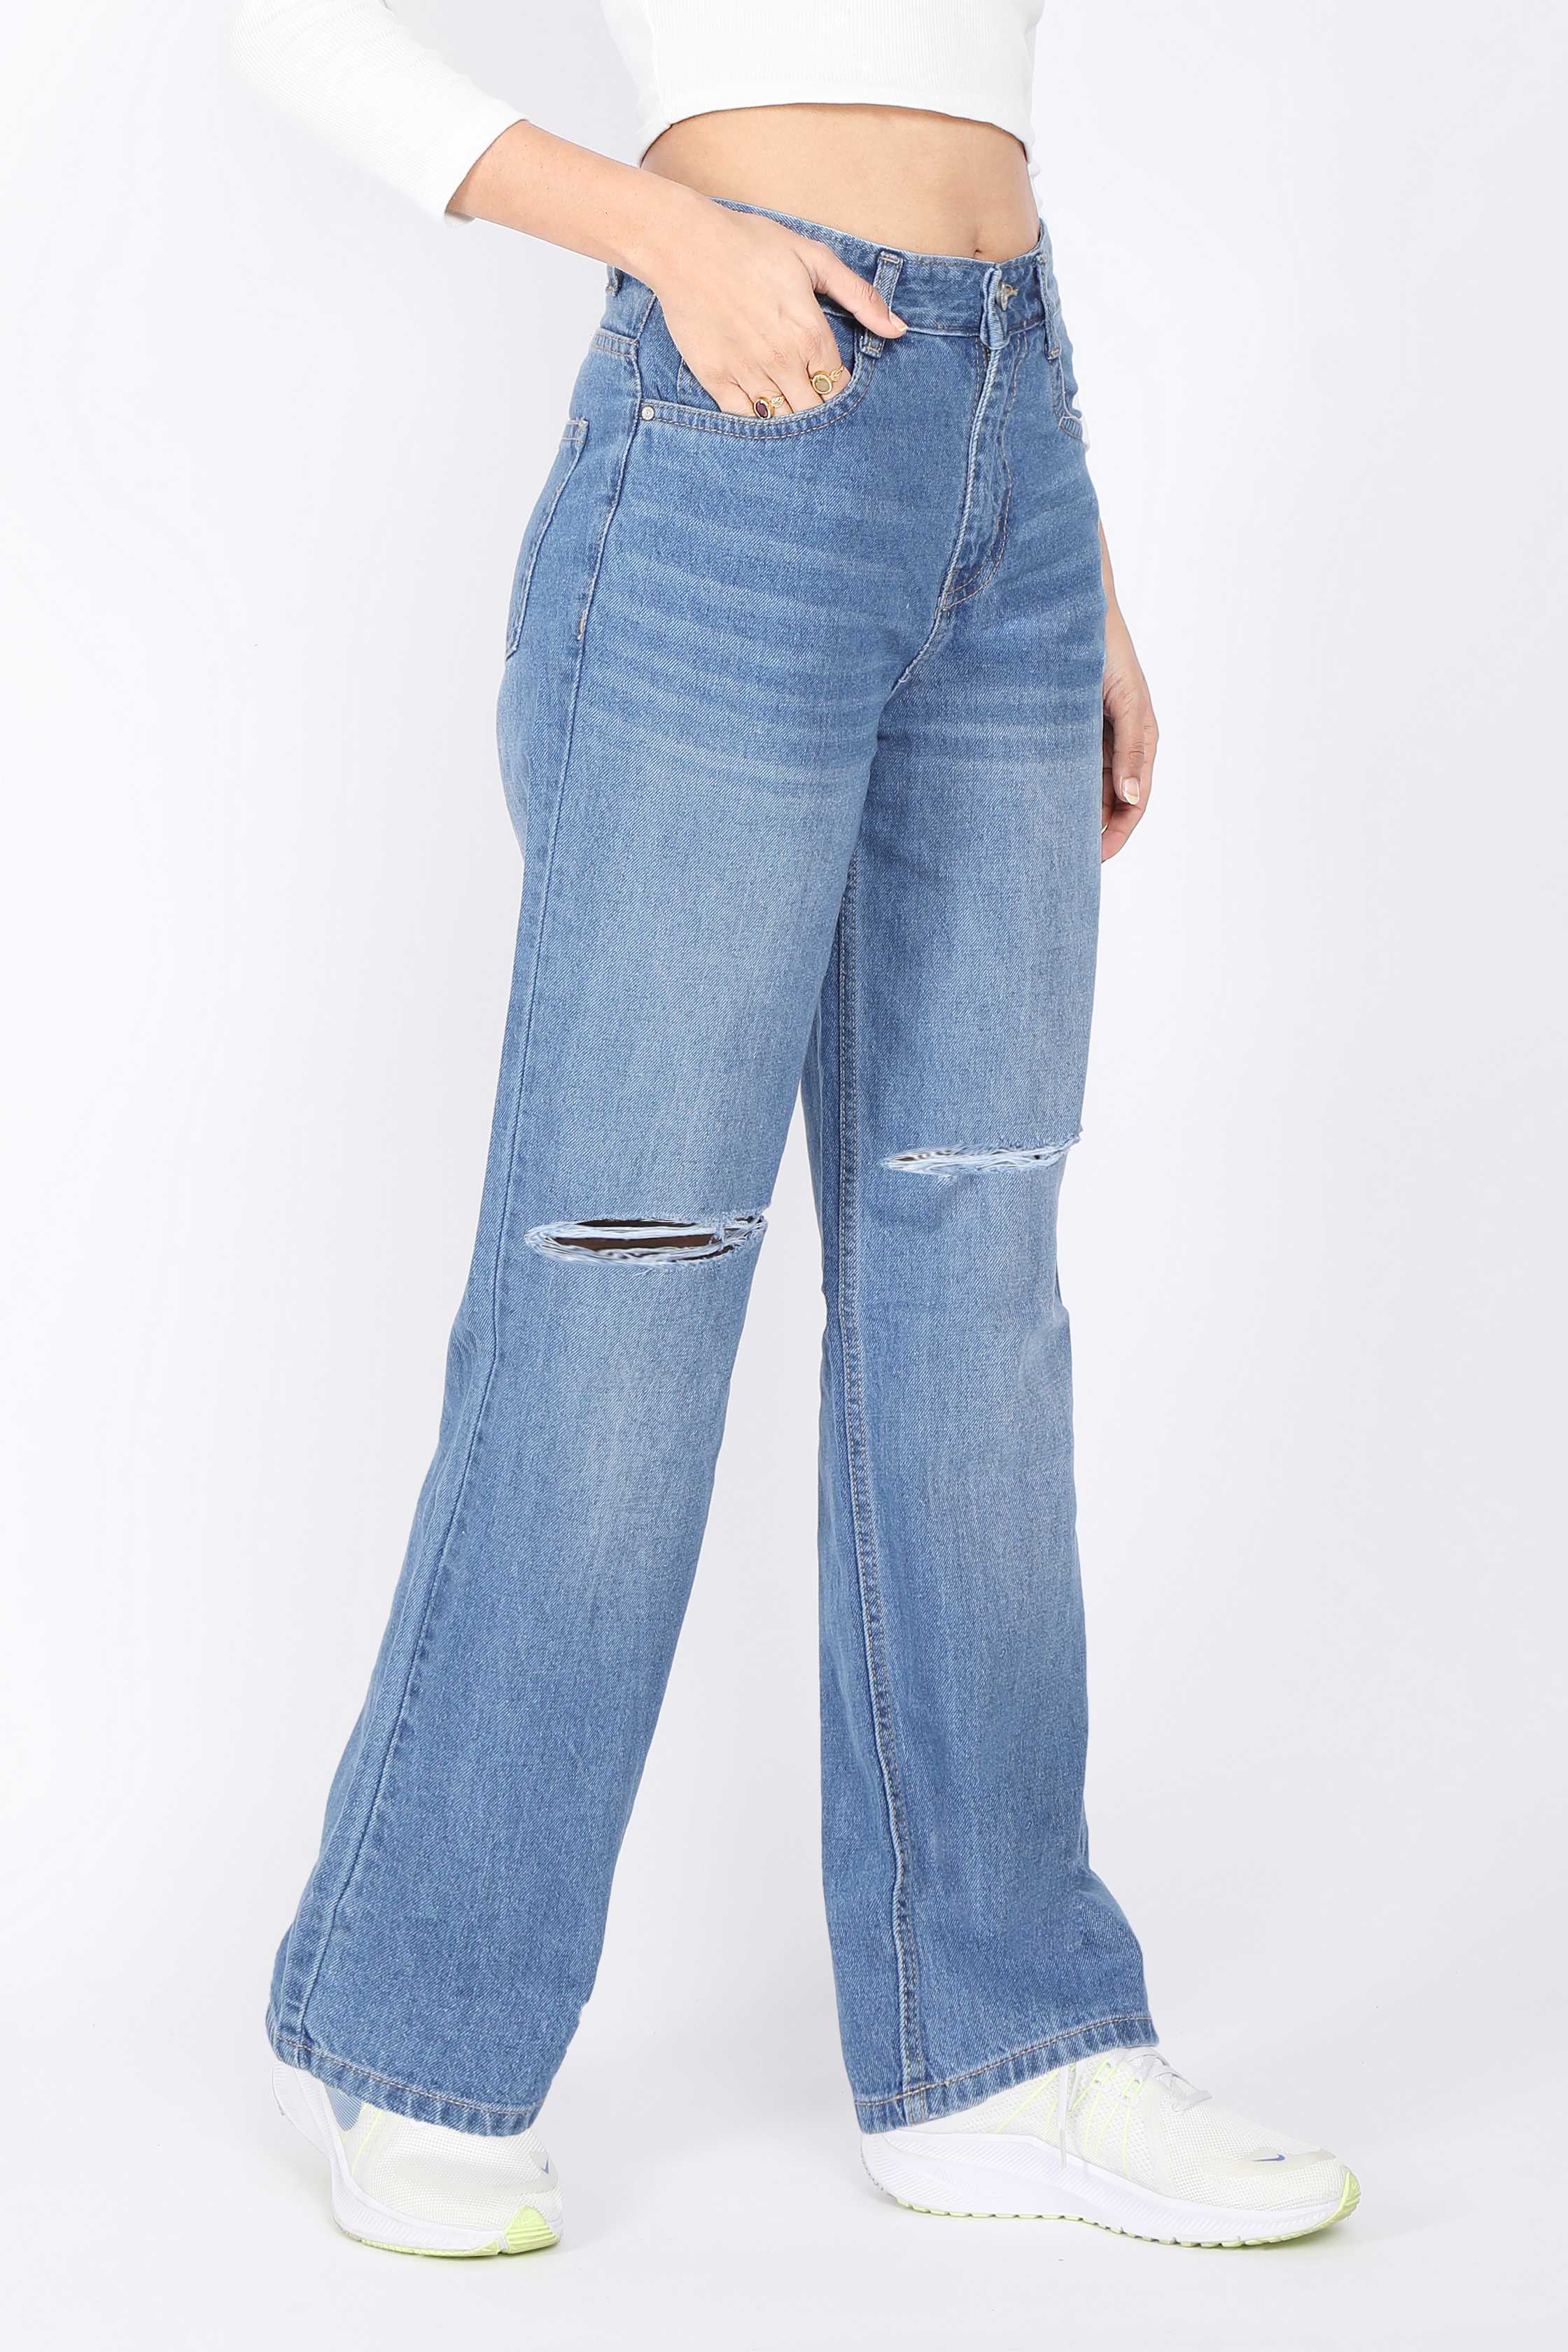 Ripped Denim High Rise Jeans For Women